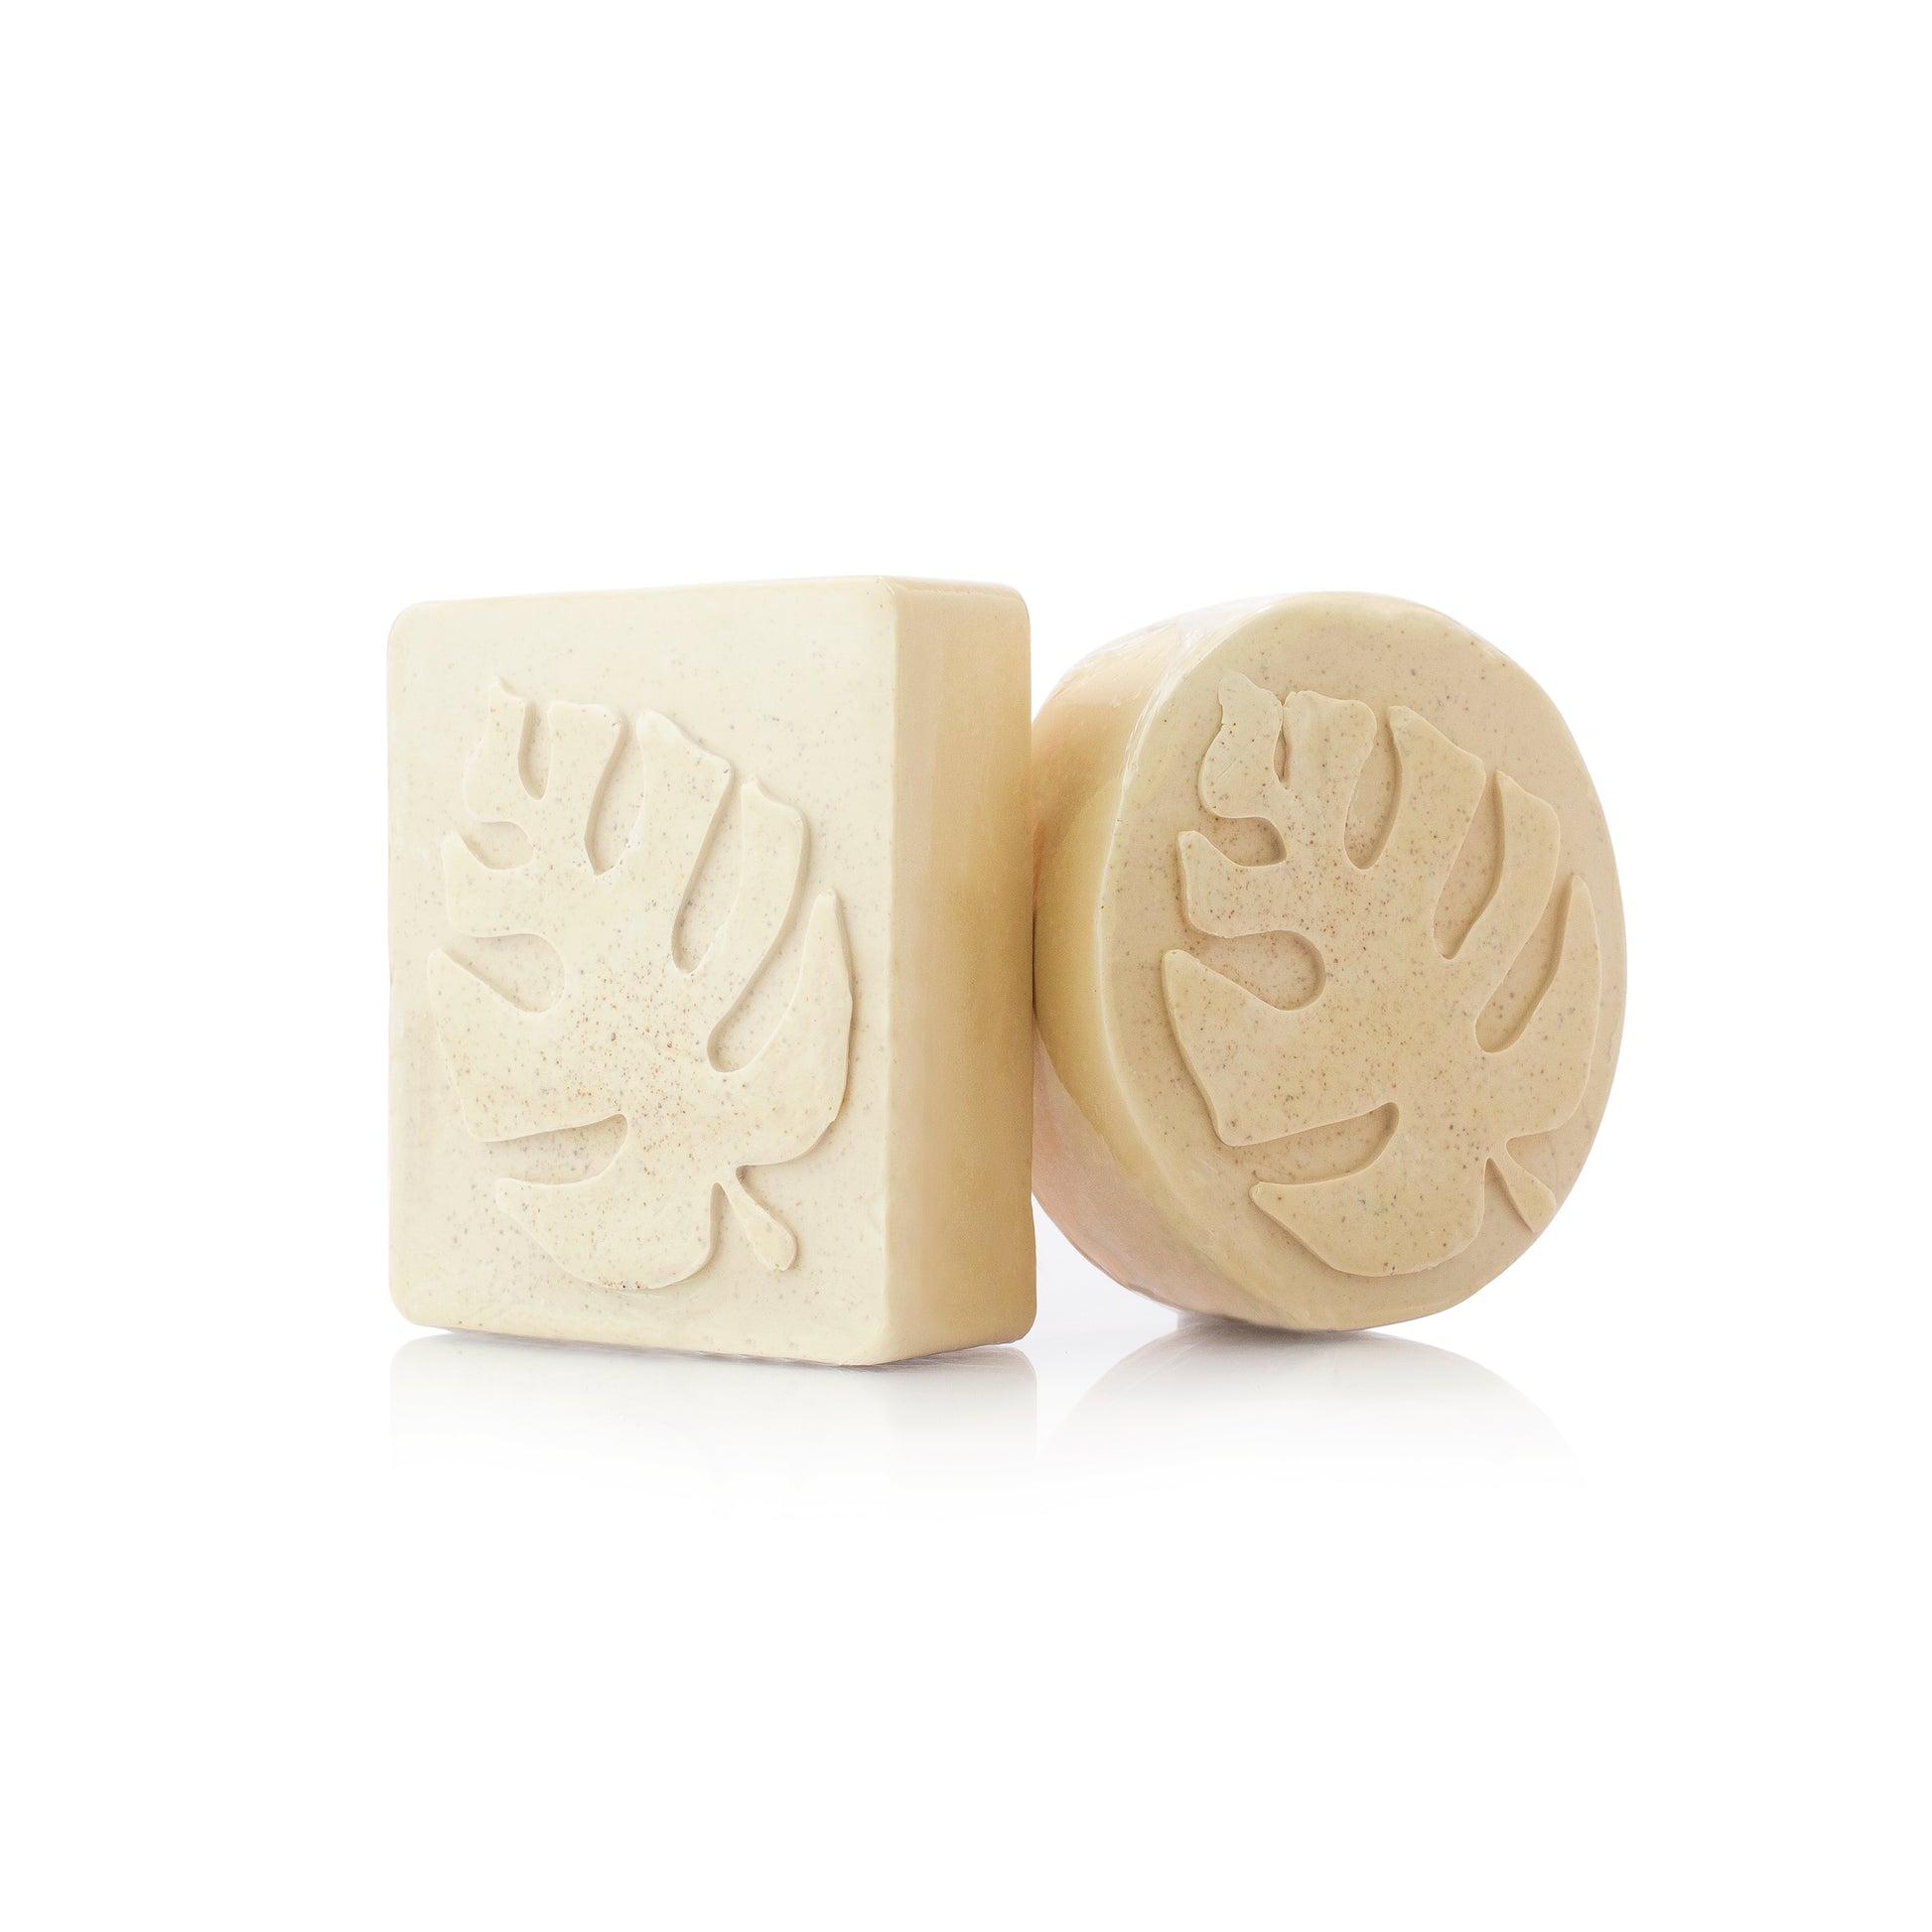 Goat milk and turmeric soap enriched with Kaolin Clay